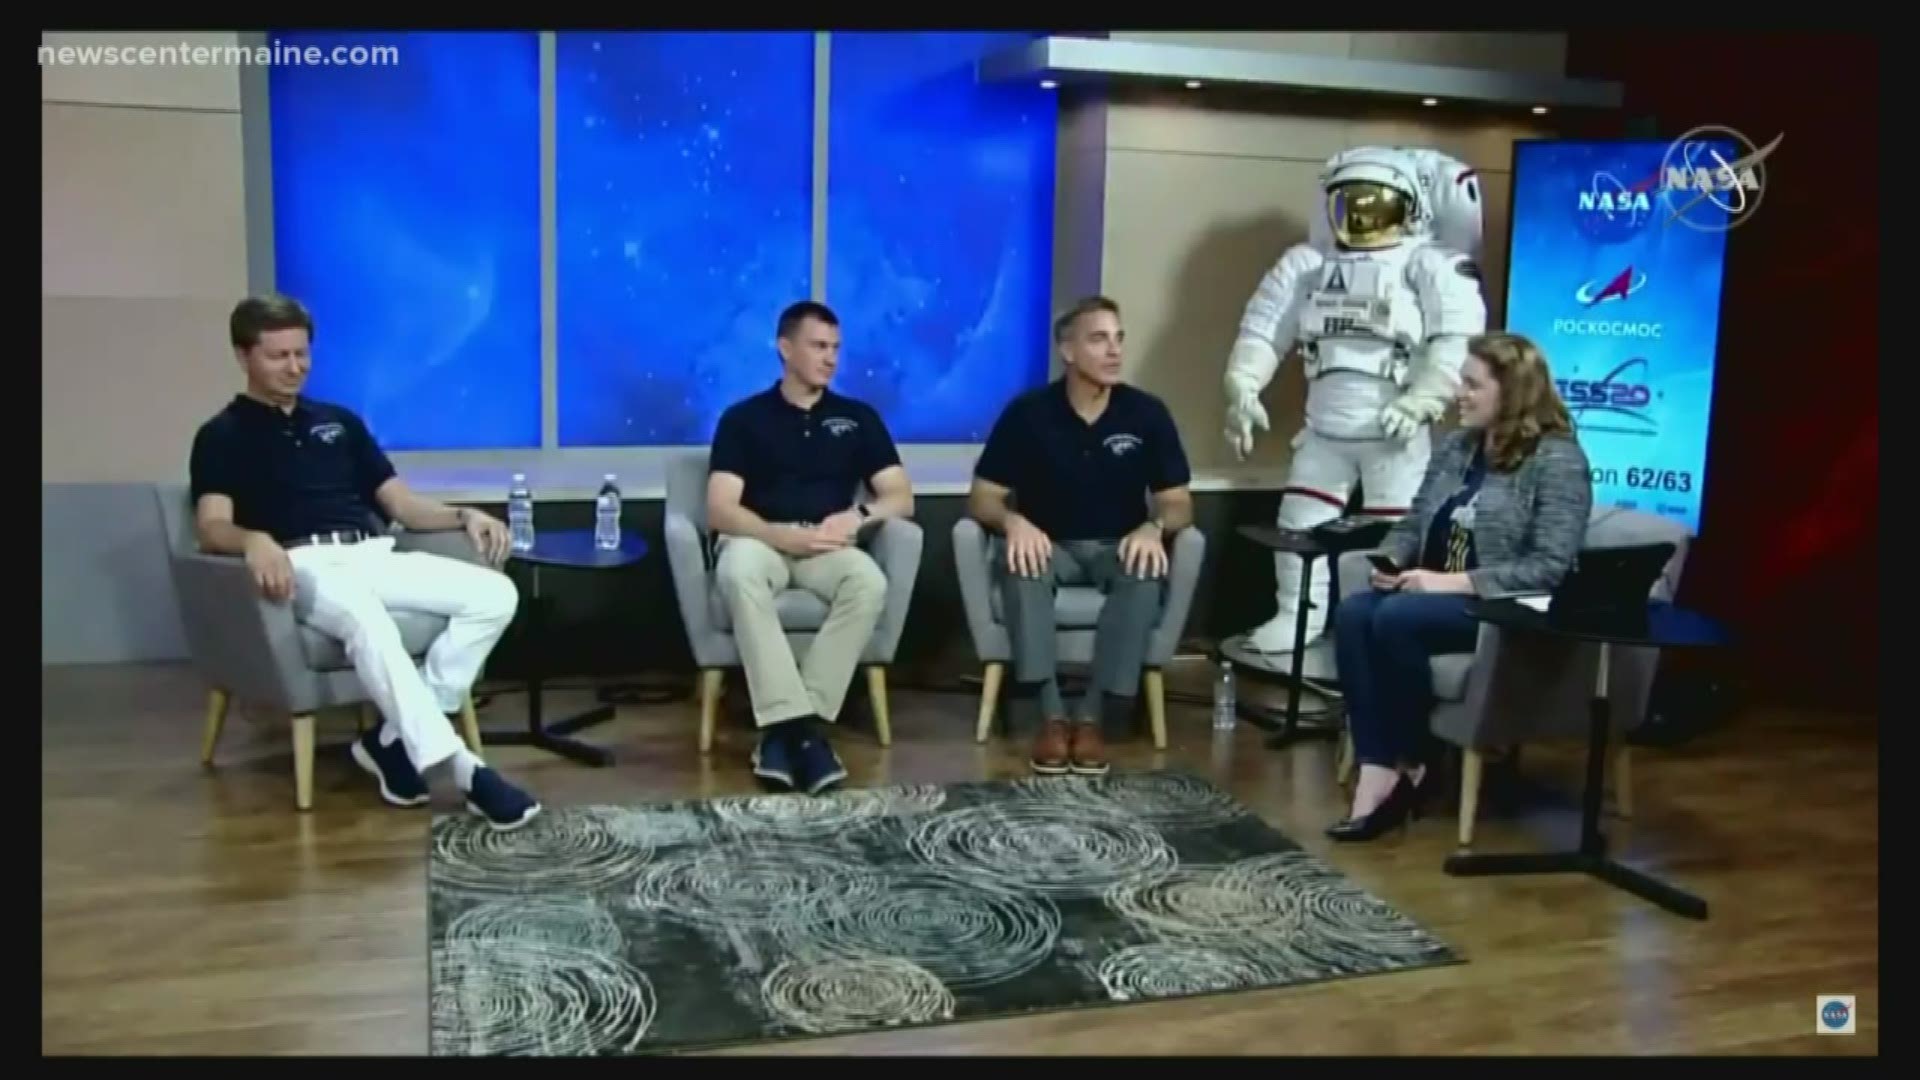 Maine astronaut Chris Cassidy going back to space.